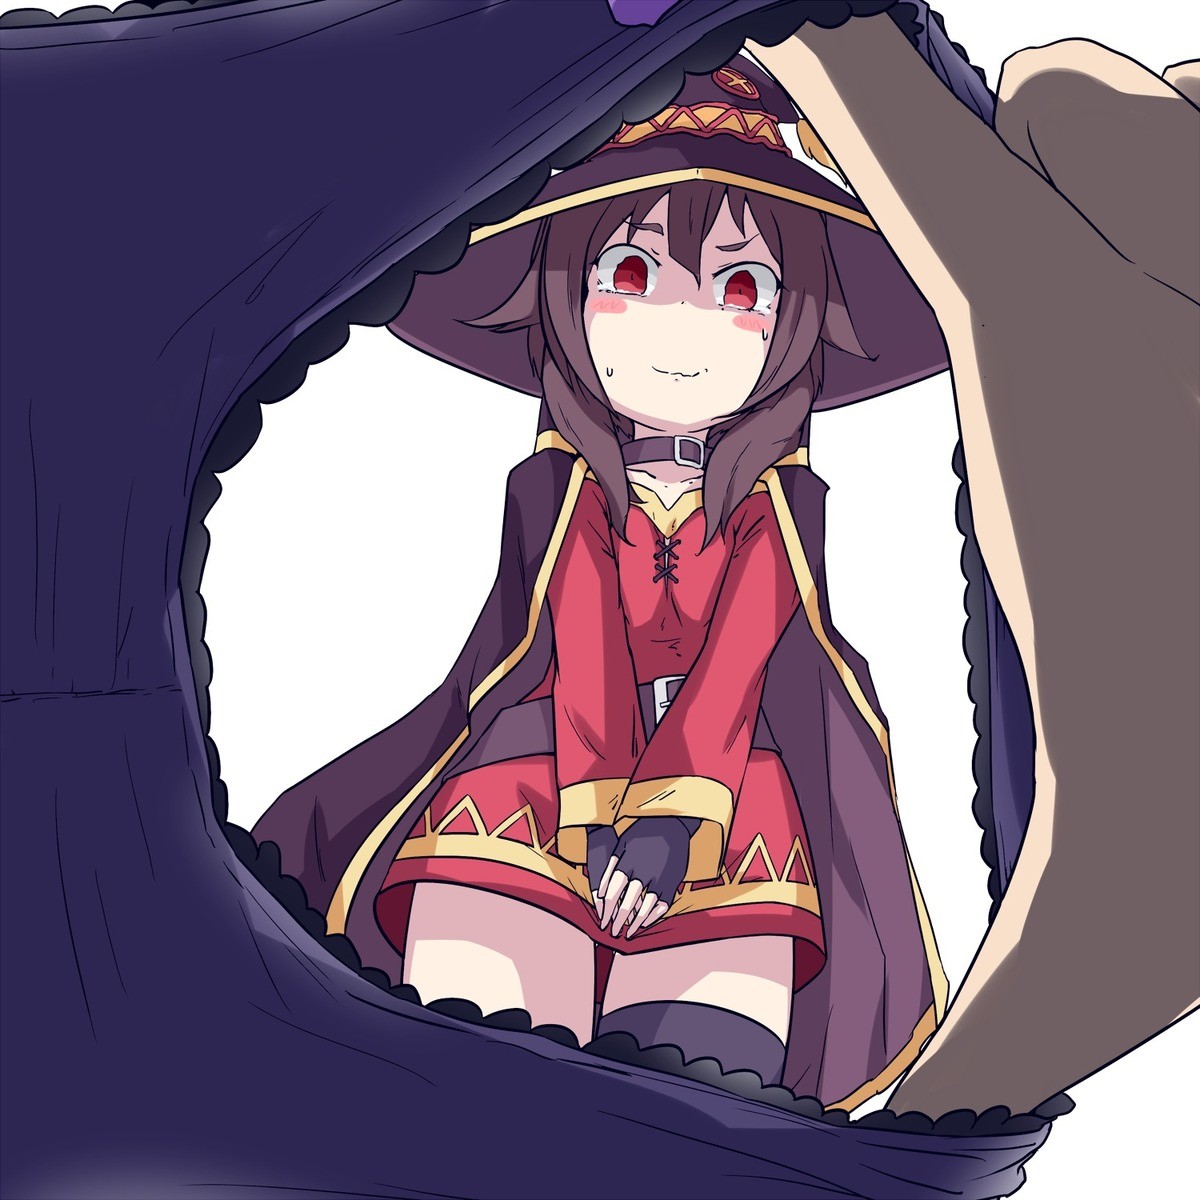 megumin seems popular so heres a comp for my subscribers.